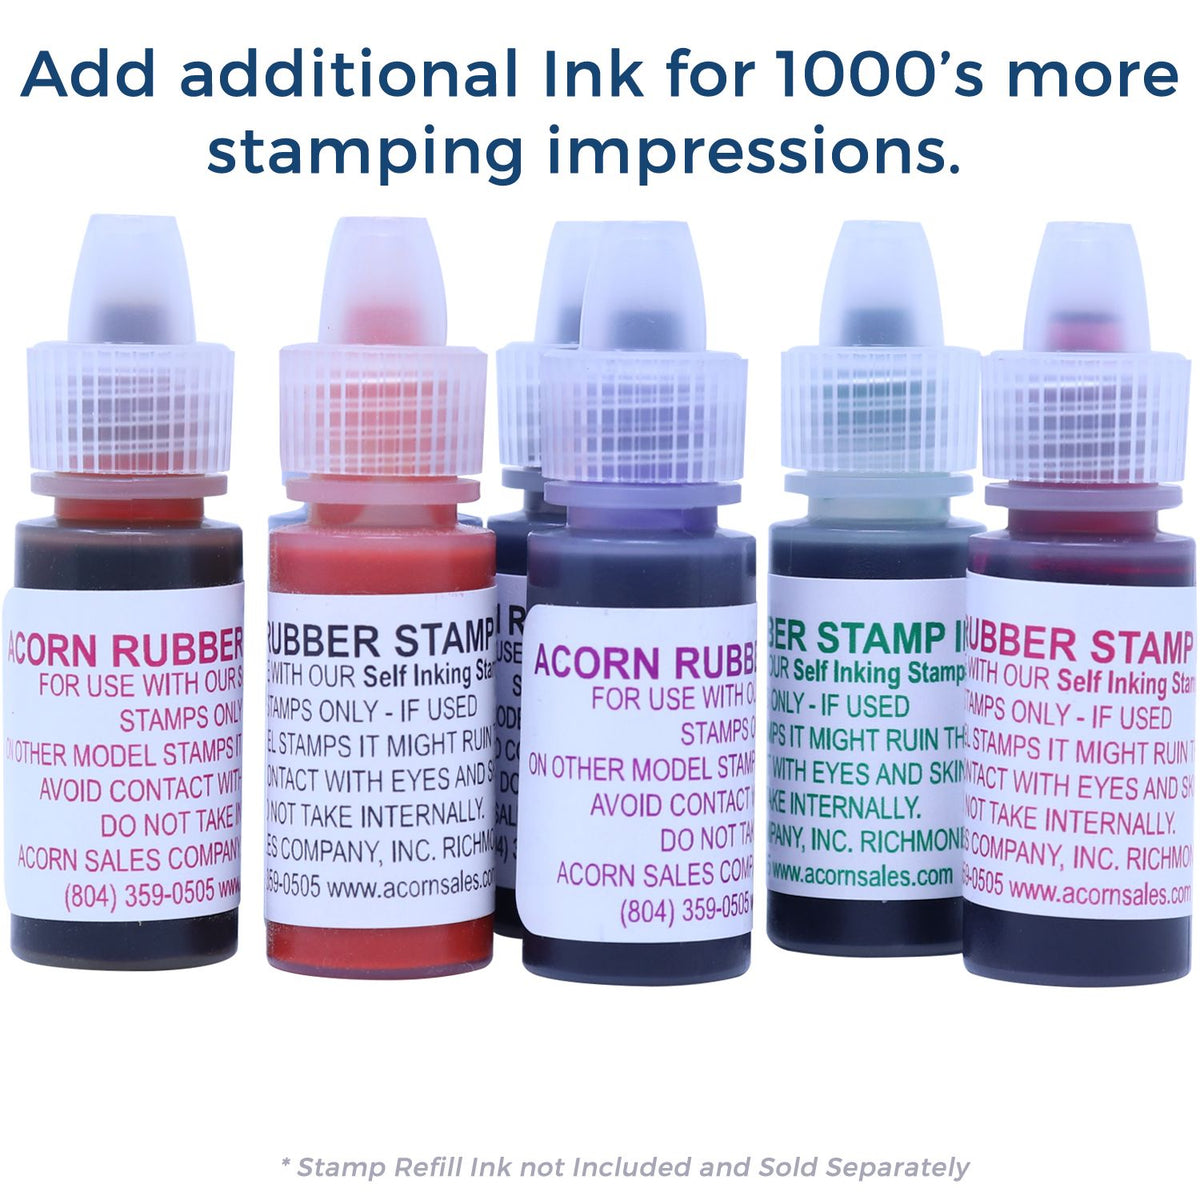 Refill Ink for Self-Inking Round Curious Smiley Stamp Available